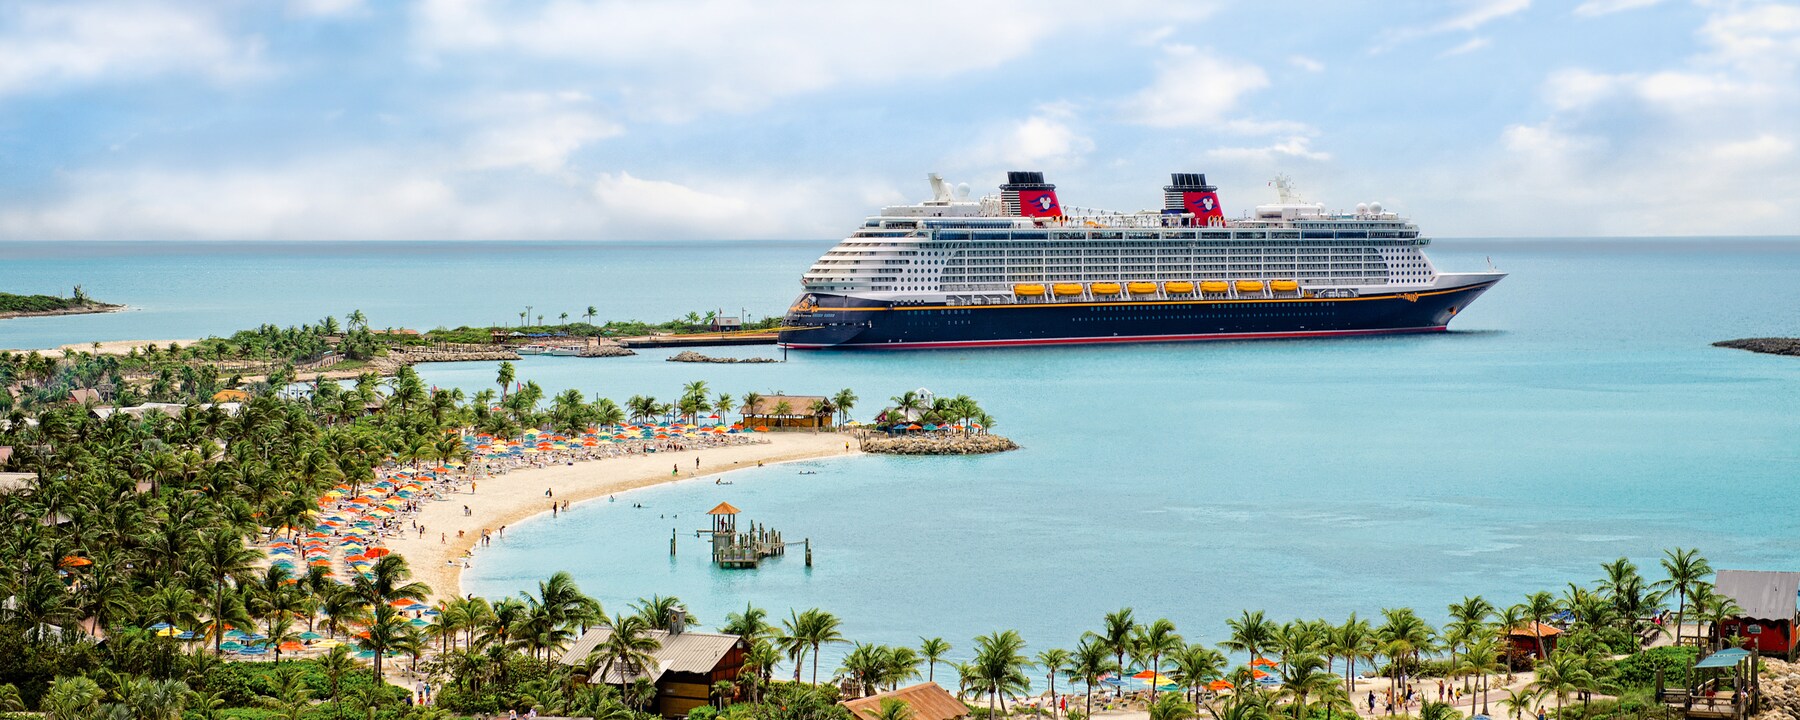 Disney Cruise Packages and Vacations Disney Cruise Line